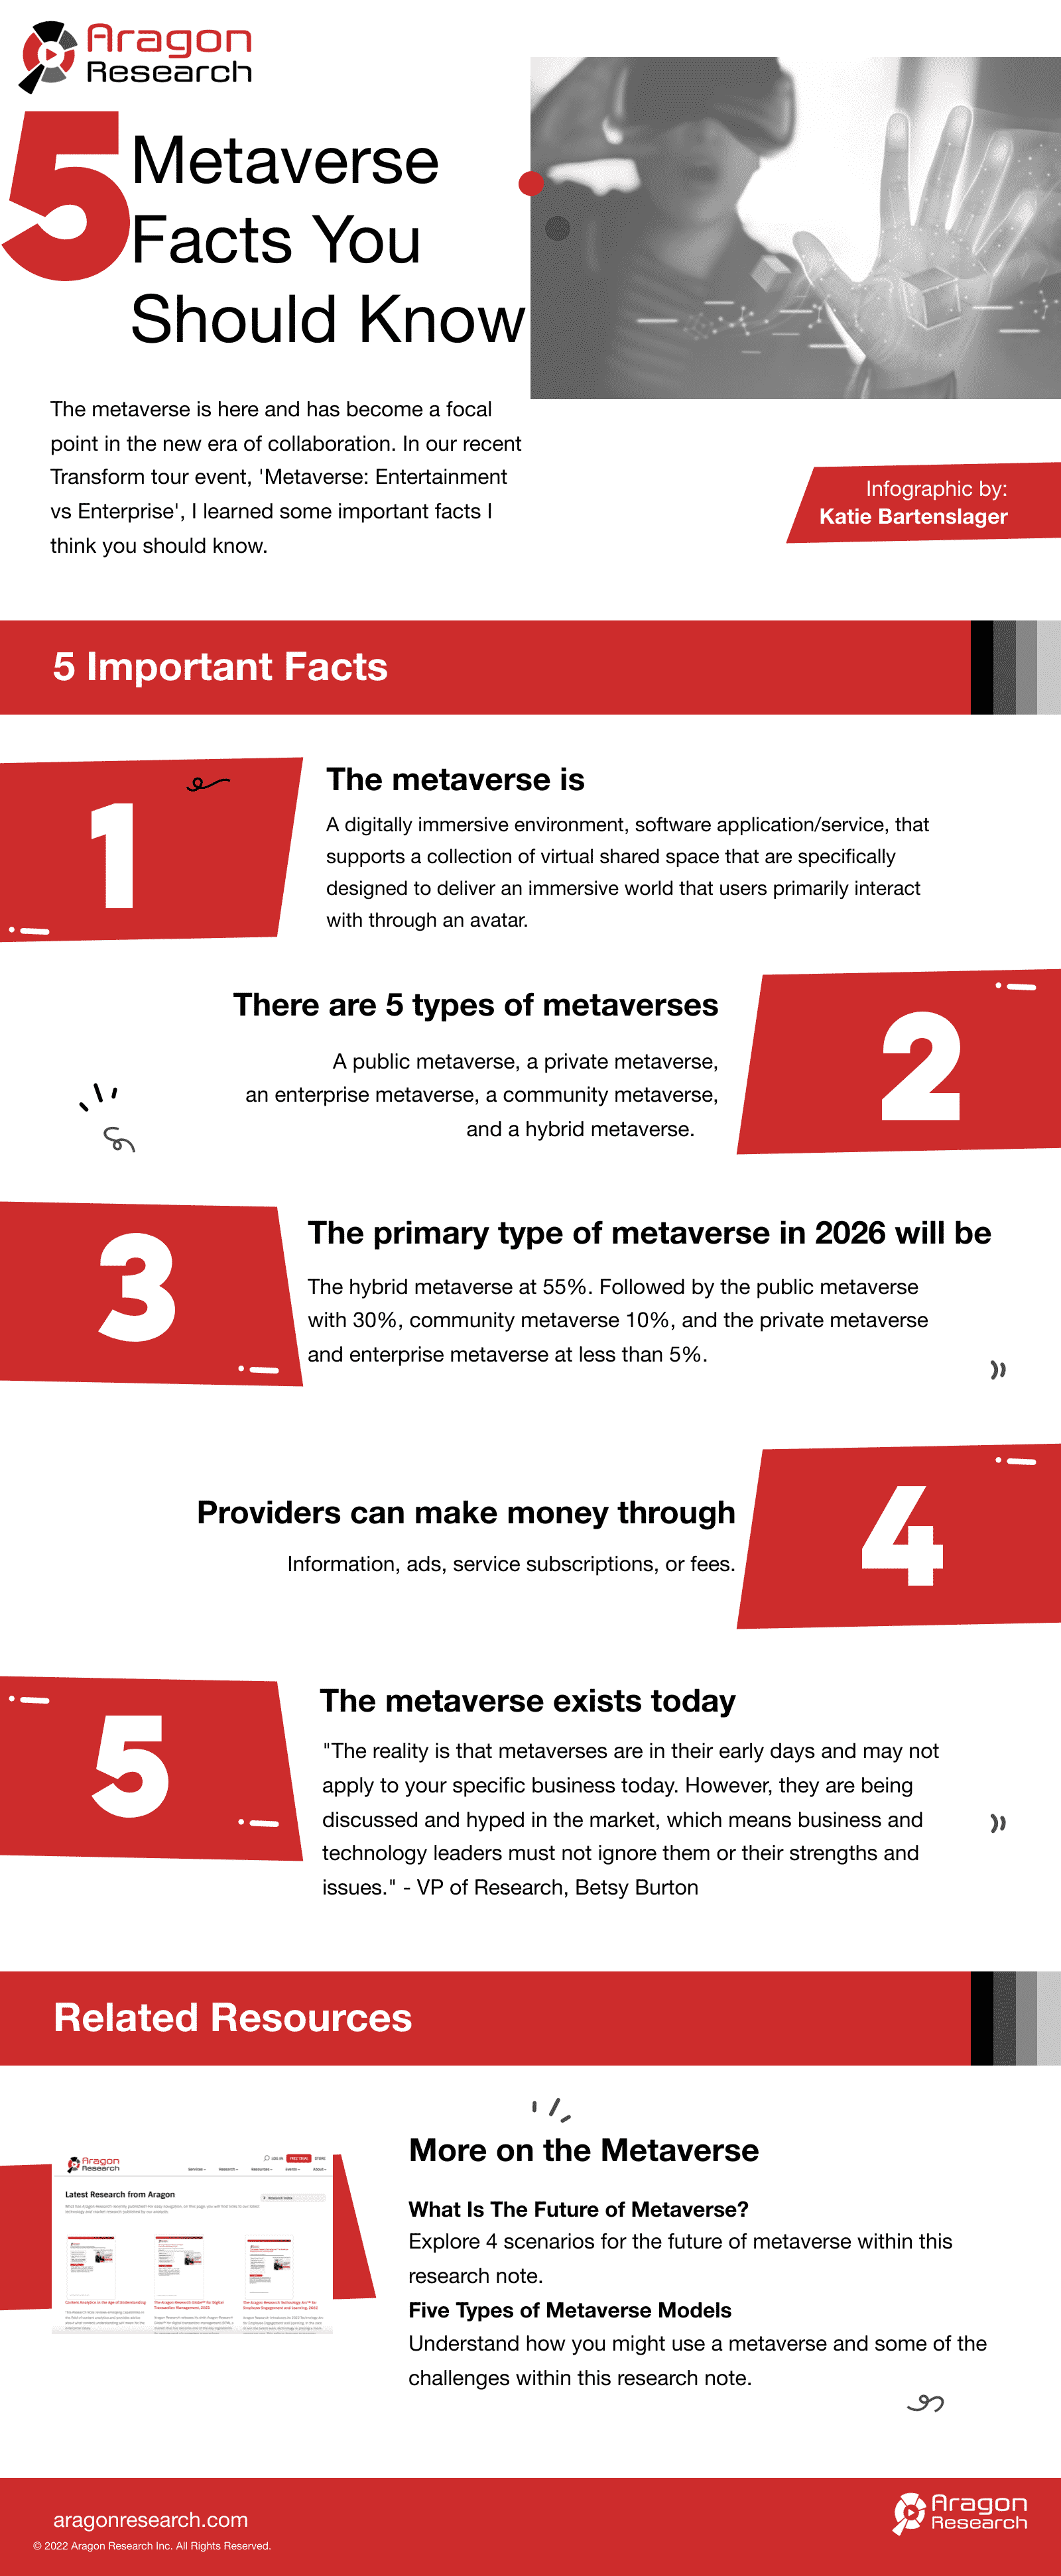 5 Metaverse facts you should know 1 - [Infographic] 5 Metaverse Facts You Should Know